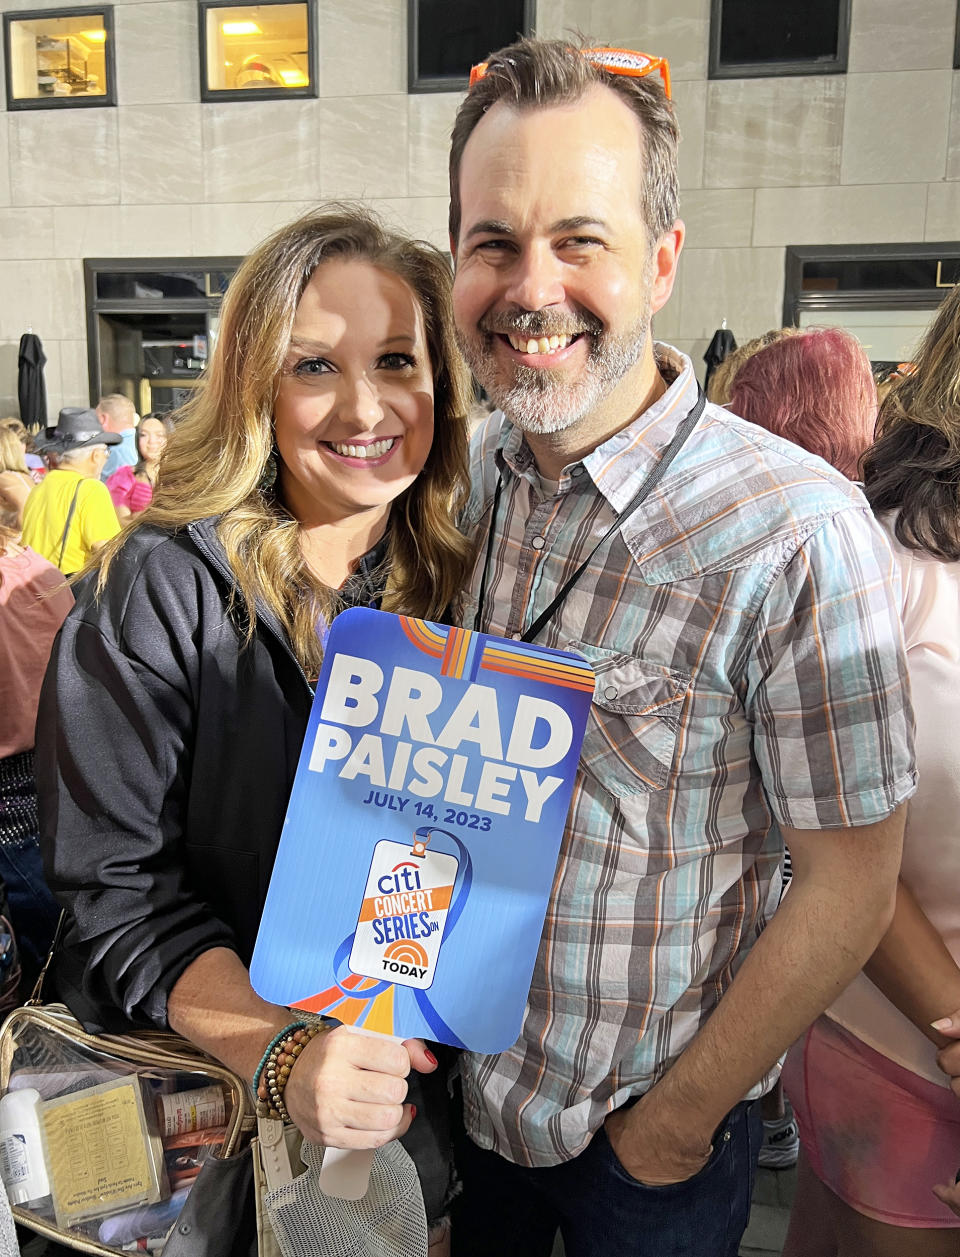 Chelsea and Justin Ohlemiller traveled from Indiana to see Brad Paisley on TODAY. At their wedding, she walked down the aisle to one of Paisley's songs. (Sarah Lemire / TODAY)